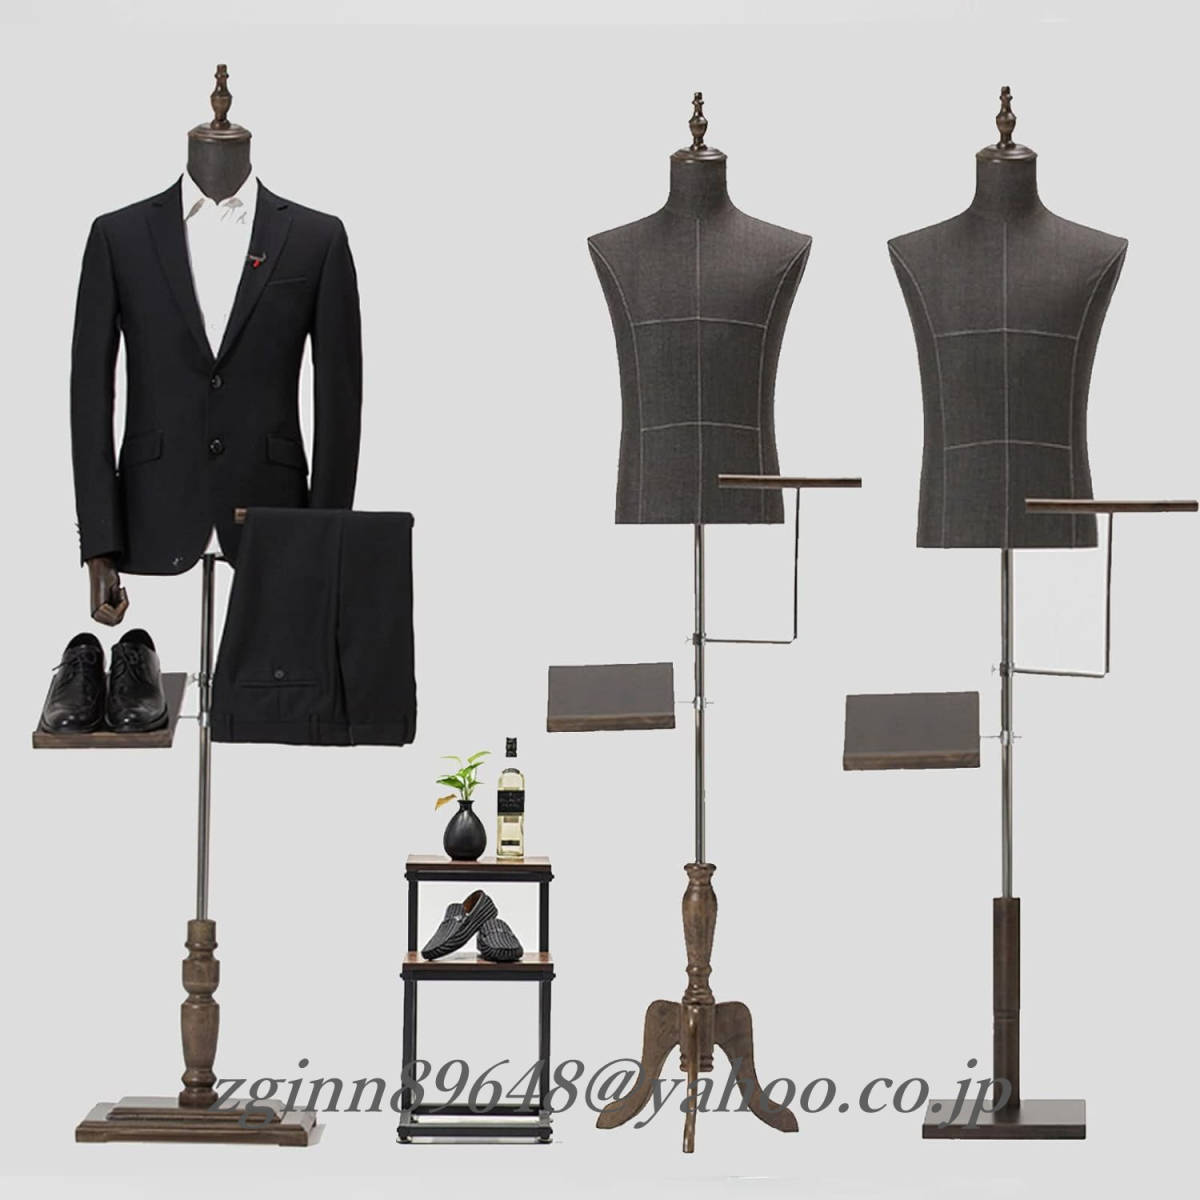  gentleman clothes. display therefore. man. mannequin man. half bust mannequin togheter with pants rack . shoes rack natural wood base adjustment possible height 